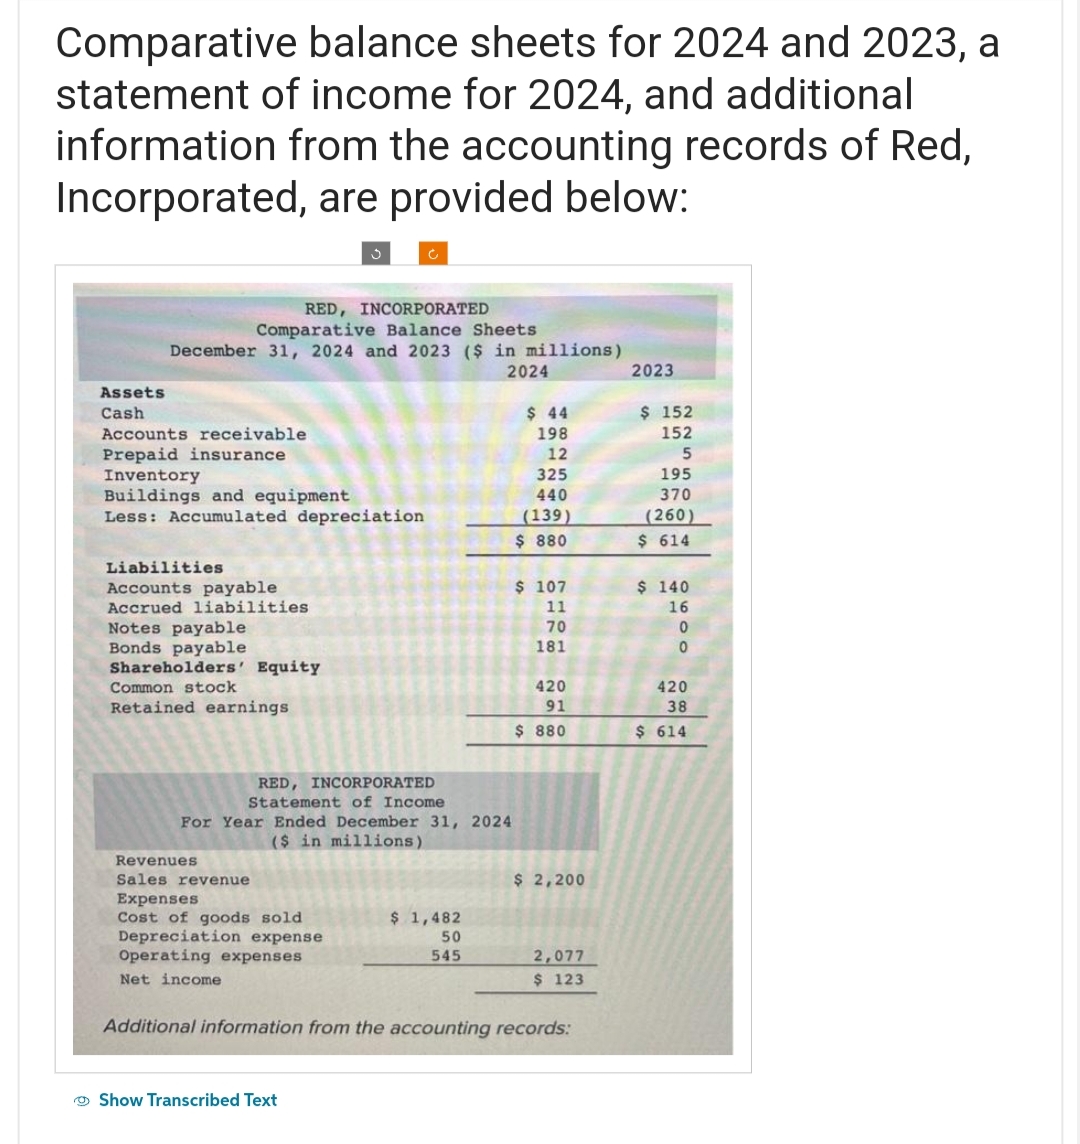 Comparative balance sheets for 2024 and 2023, a
statement of income for 2024, and additional
information from the accounting records of Red,
Incorporated, are provided below:
Assets
Cash
RED, INCORPORATED
Comparative Balance Sheets
December 31, 2024 and 2023 ($ in millions)
2024
Accounts receivable
Prepaid insurance.
Inventory
Buildings and equipment
Less: Accumulated depreciation
Liabilities
Accounts payable
Accrued liabilities
Notes payable
Bonds payable
Shareholders' Equity
Common stock
Retained earnings
RED, INCORPORATED
Statement of Income
For Year Ended December 31, 2024
($ in millions)
Revenues
Sales revenue
Expenses
Cost of goods sold
Depreciation expense
Operating expenses
Net income
$ 1,482
50
545
Show Transcribed Text
$44
198
12
325
440
(139)
$ 880
$ 107
11
70
181
420
91
$ 880
$ 2,200
2,077
$ 123
Additional information from the accounting records:
2023
$152
152
5
195
370
(260)
$ 614
$ 140
16
0
0
420
38
$ 614